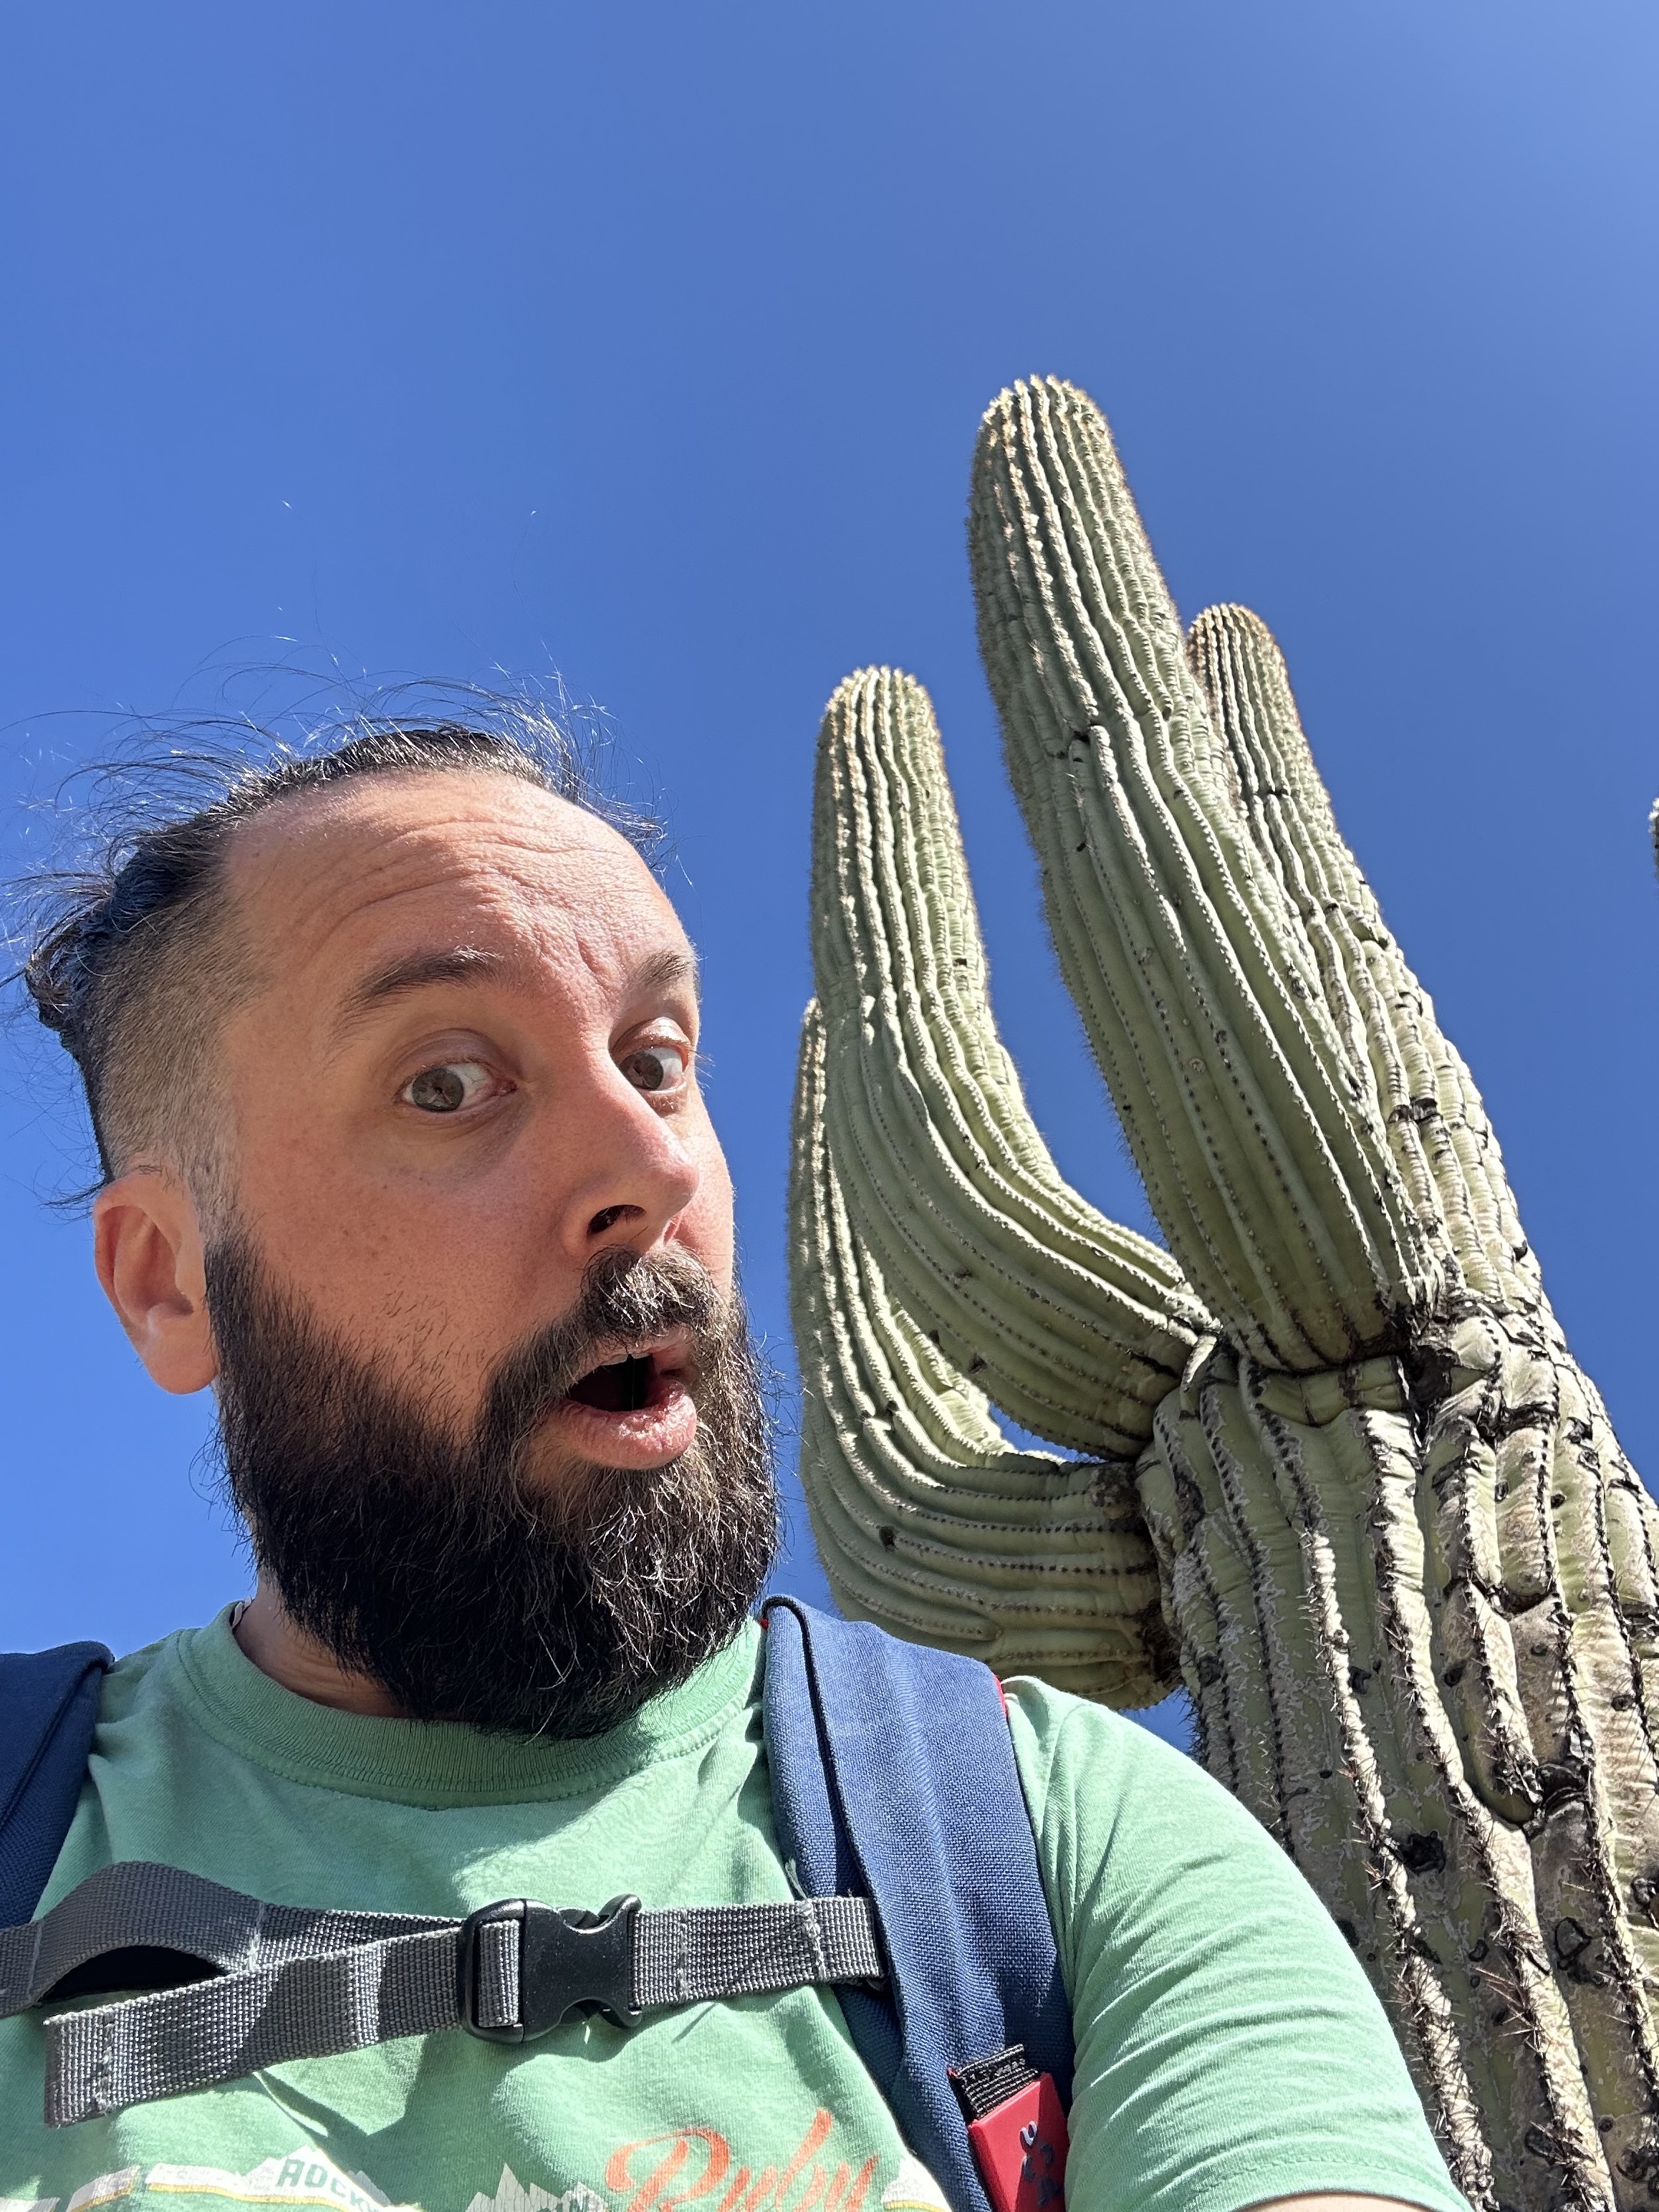 Selfie in front of a cactus